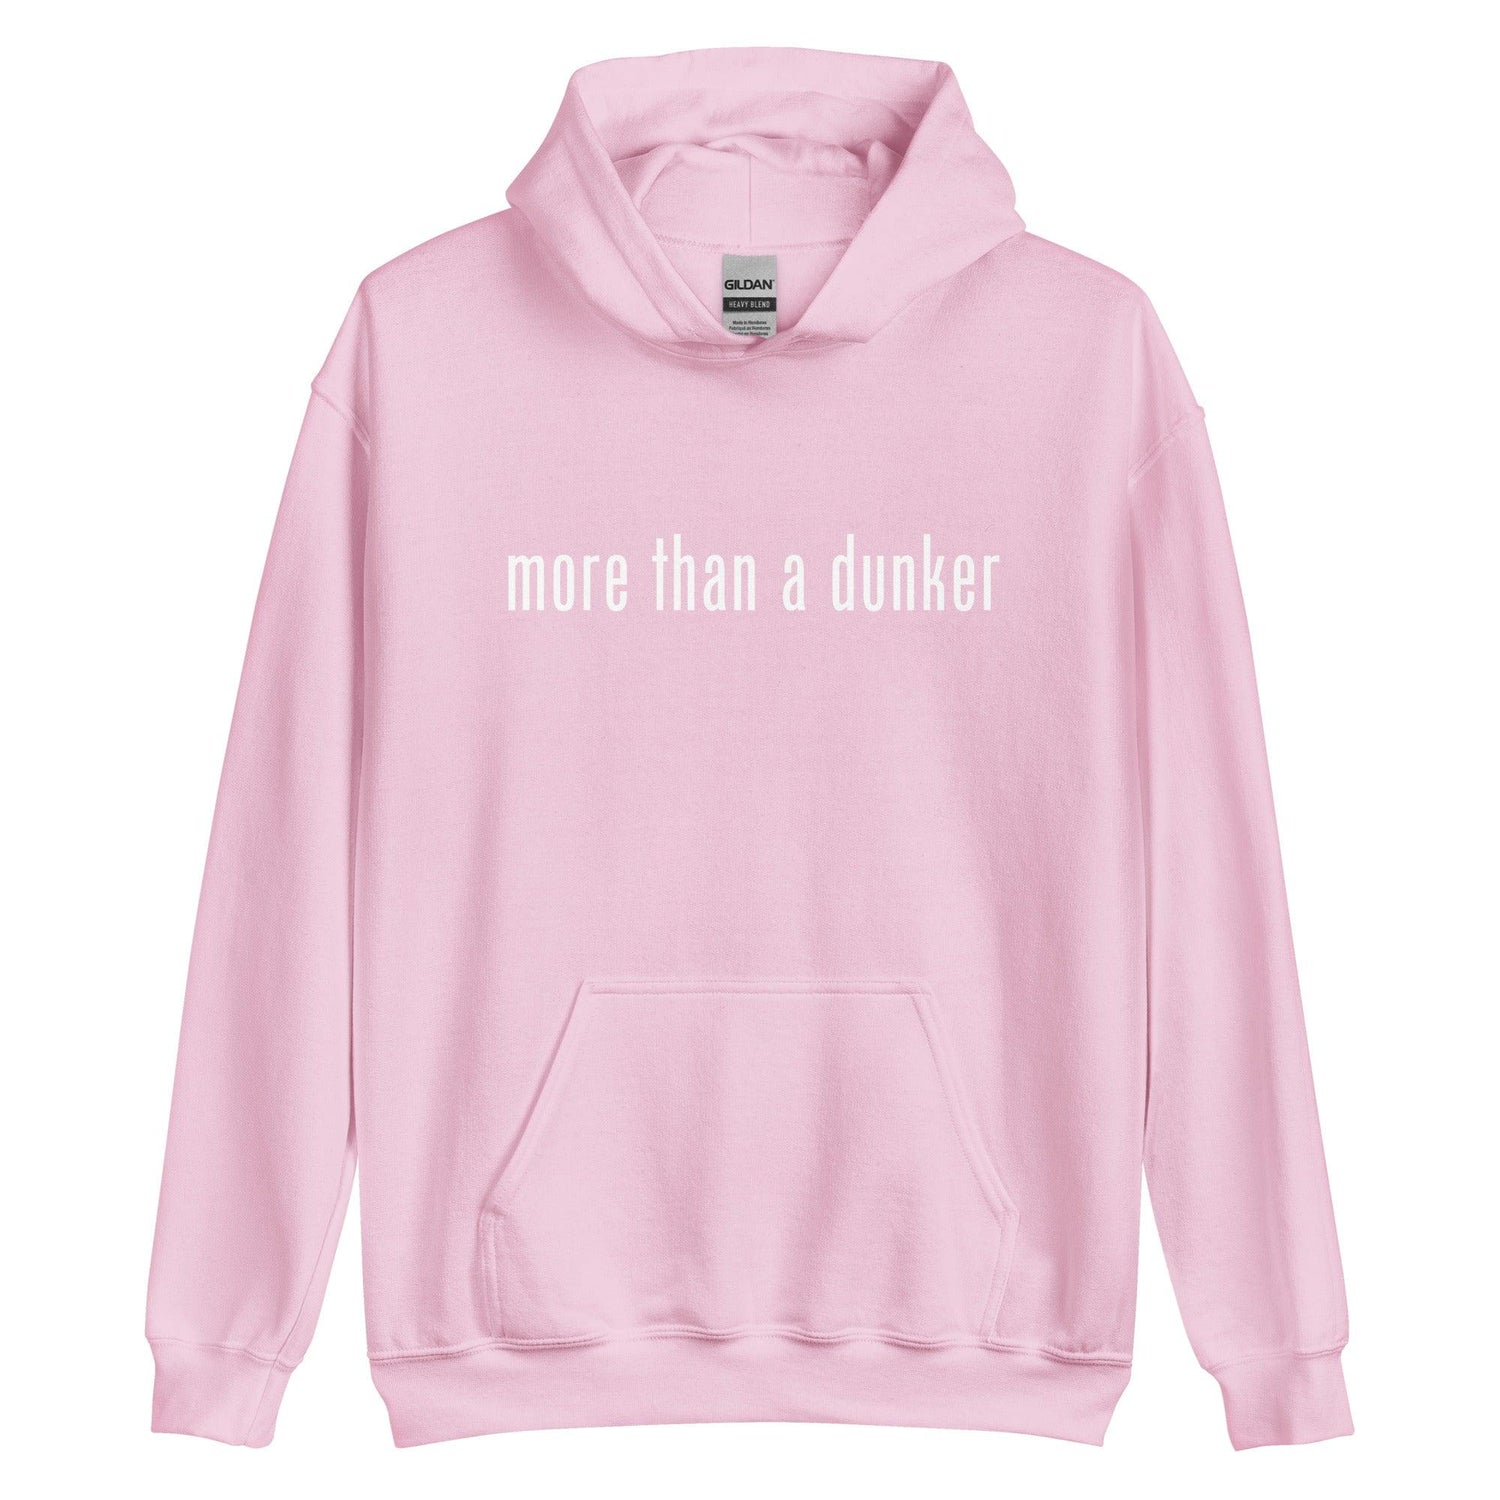 Chris Staples "More Than a Dunker" Hoodie - Fan Arch